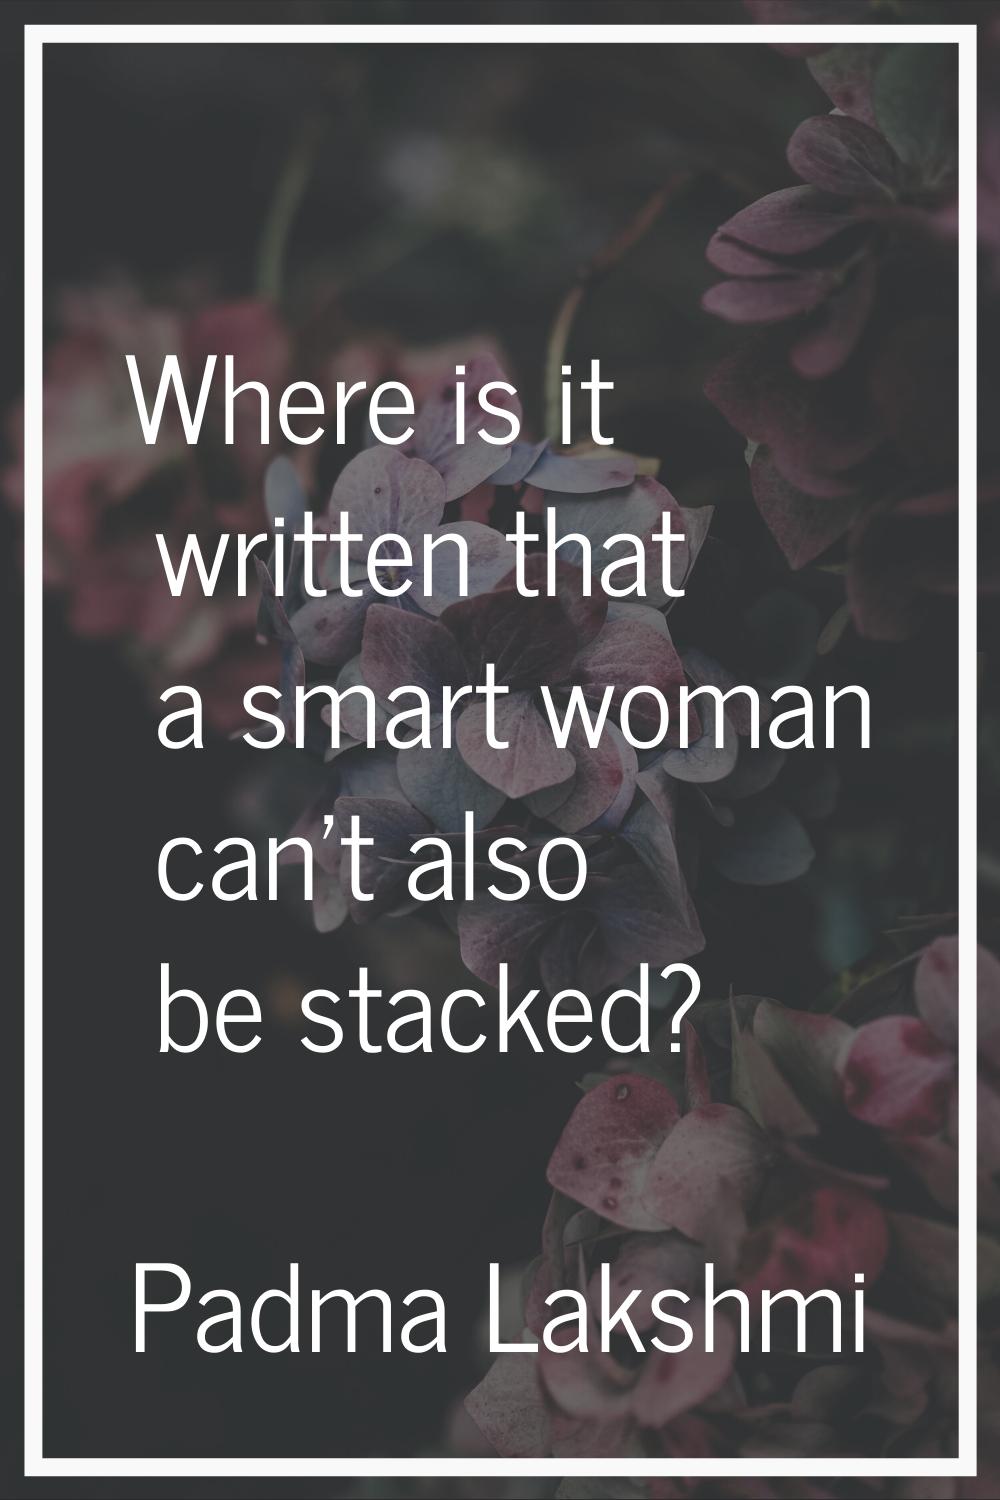 Where is it written that a smart woman can't also be stacked?